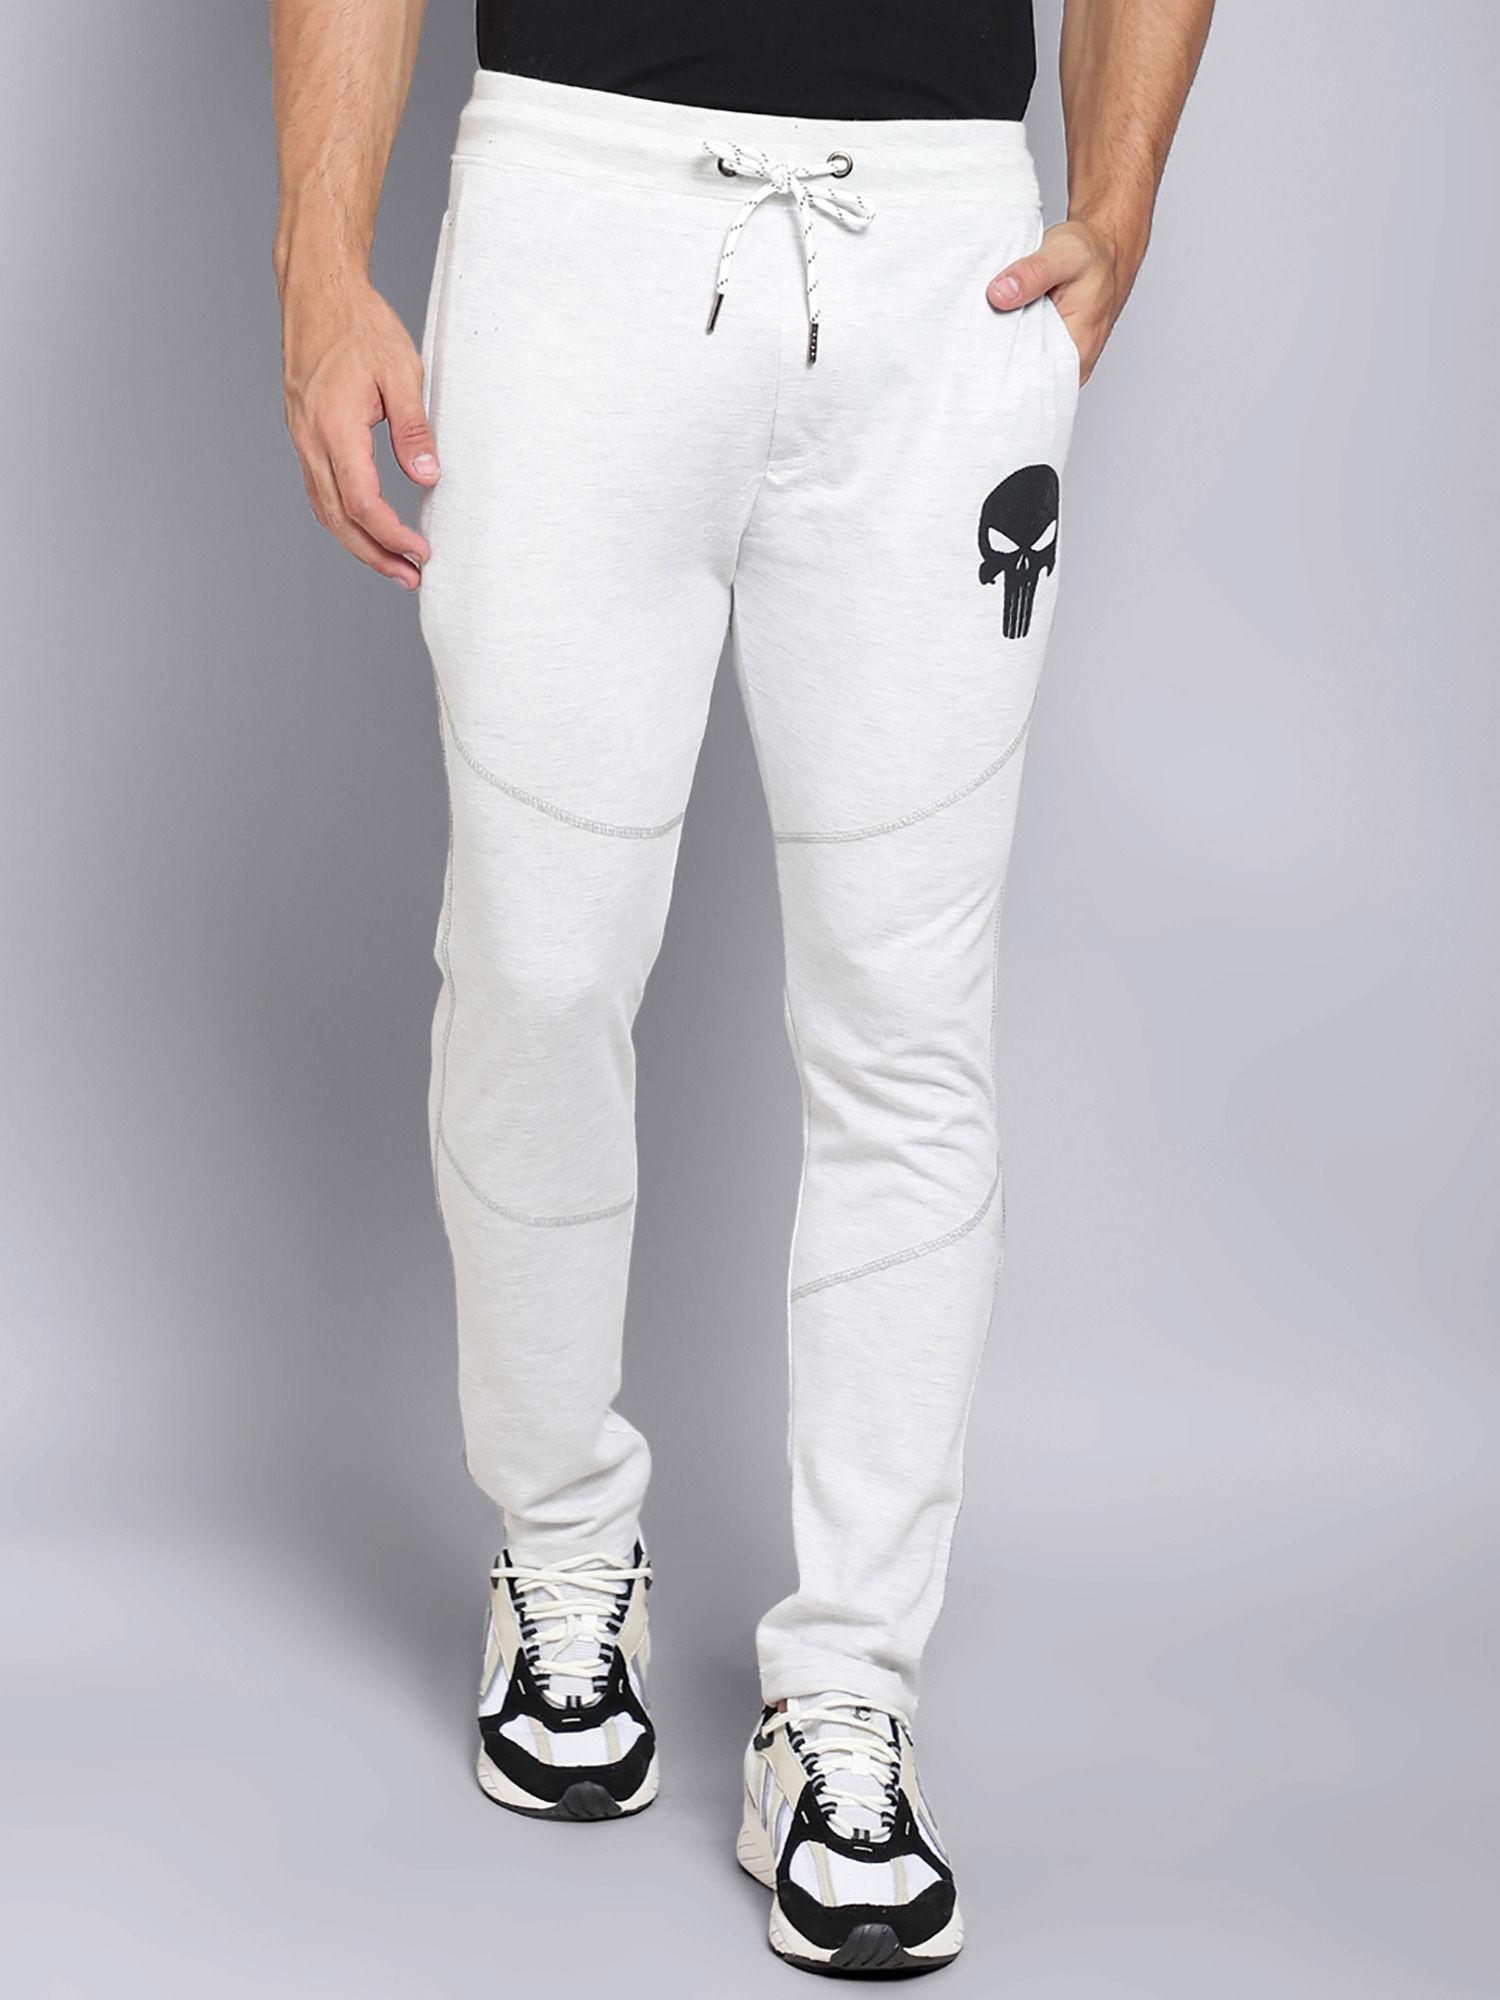 punisher featured grey joggers for men